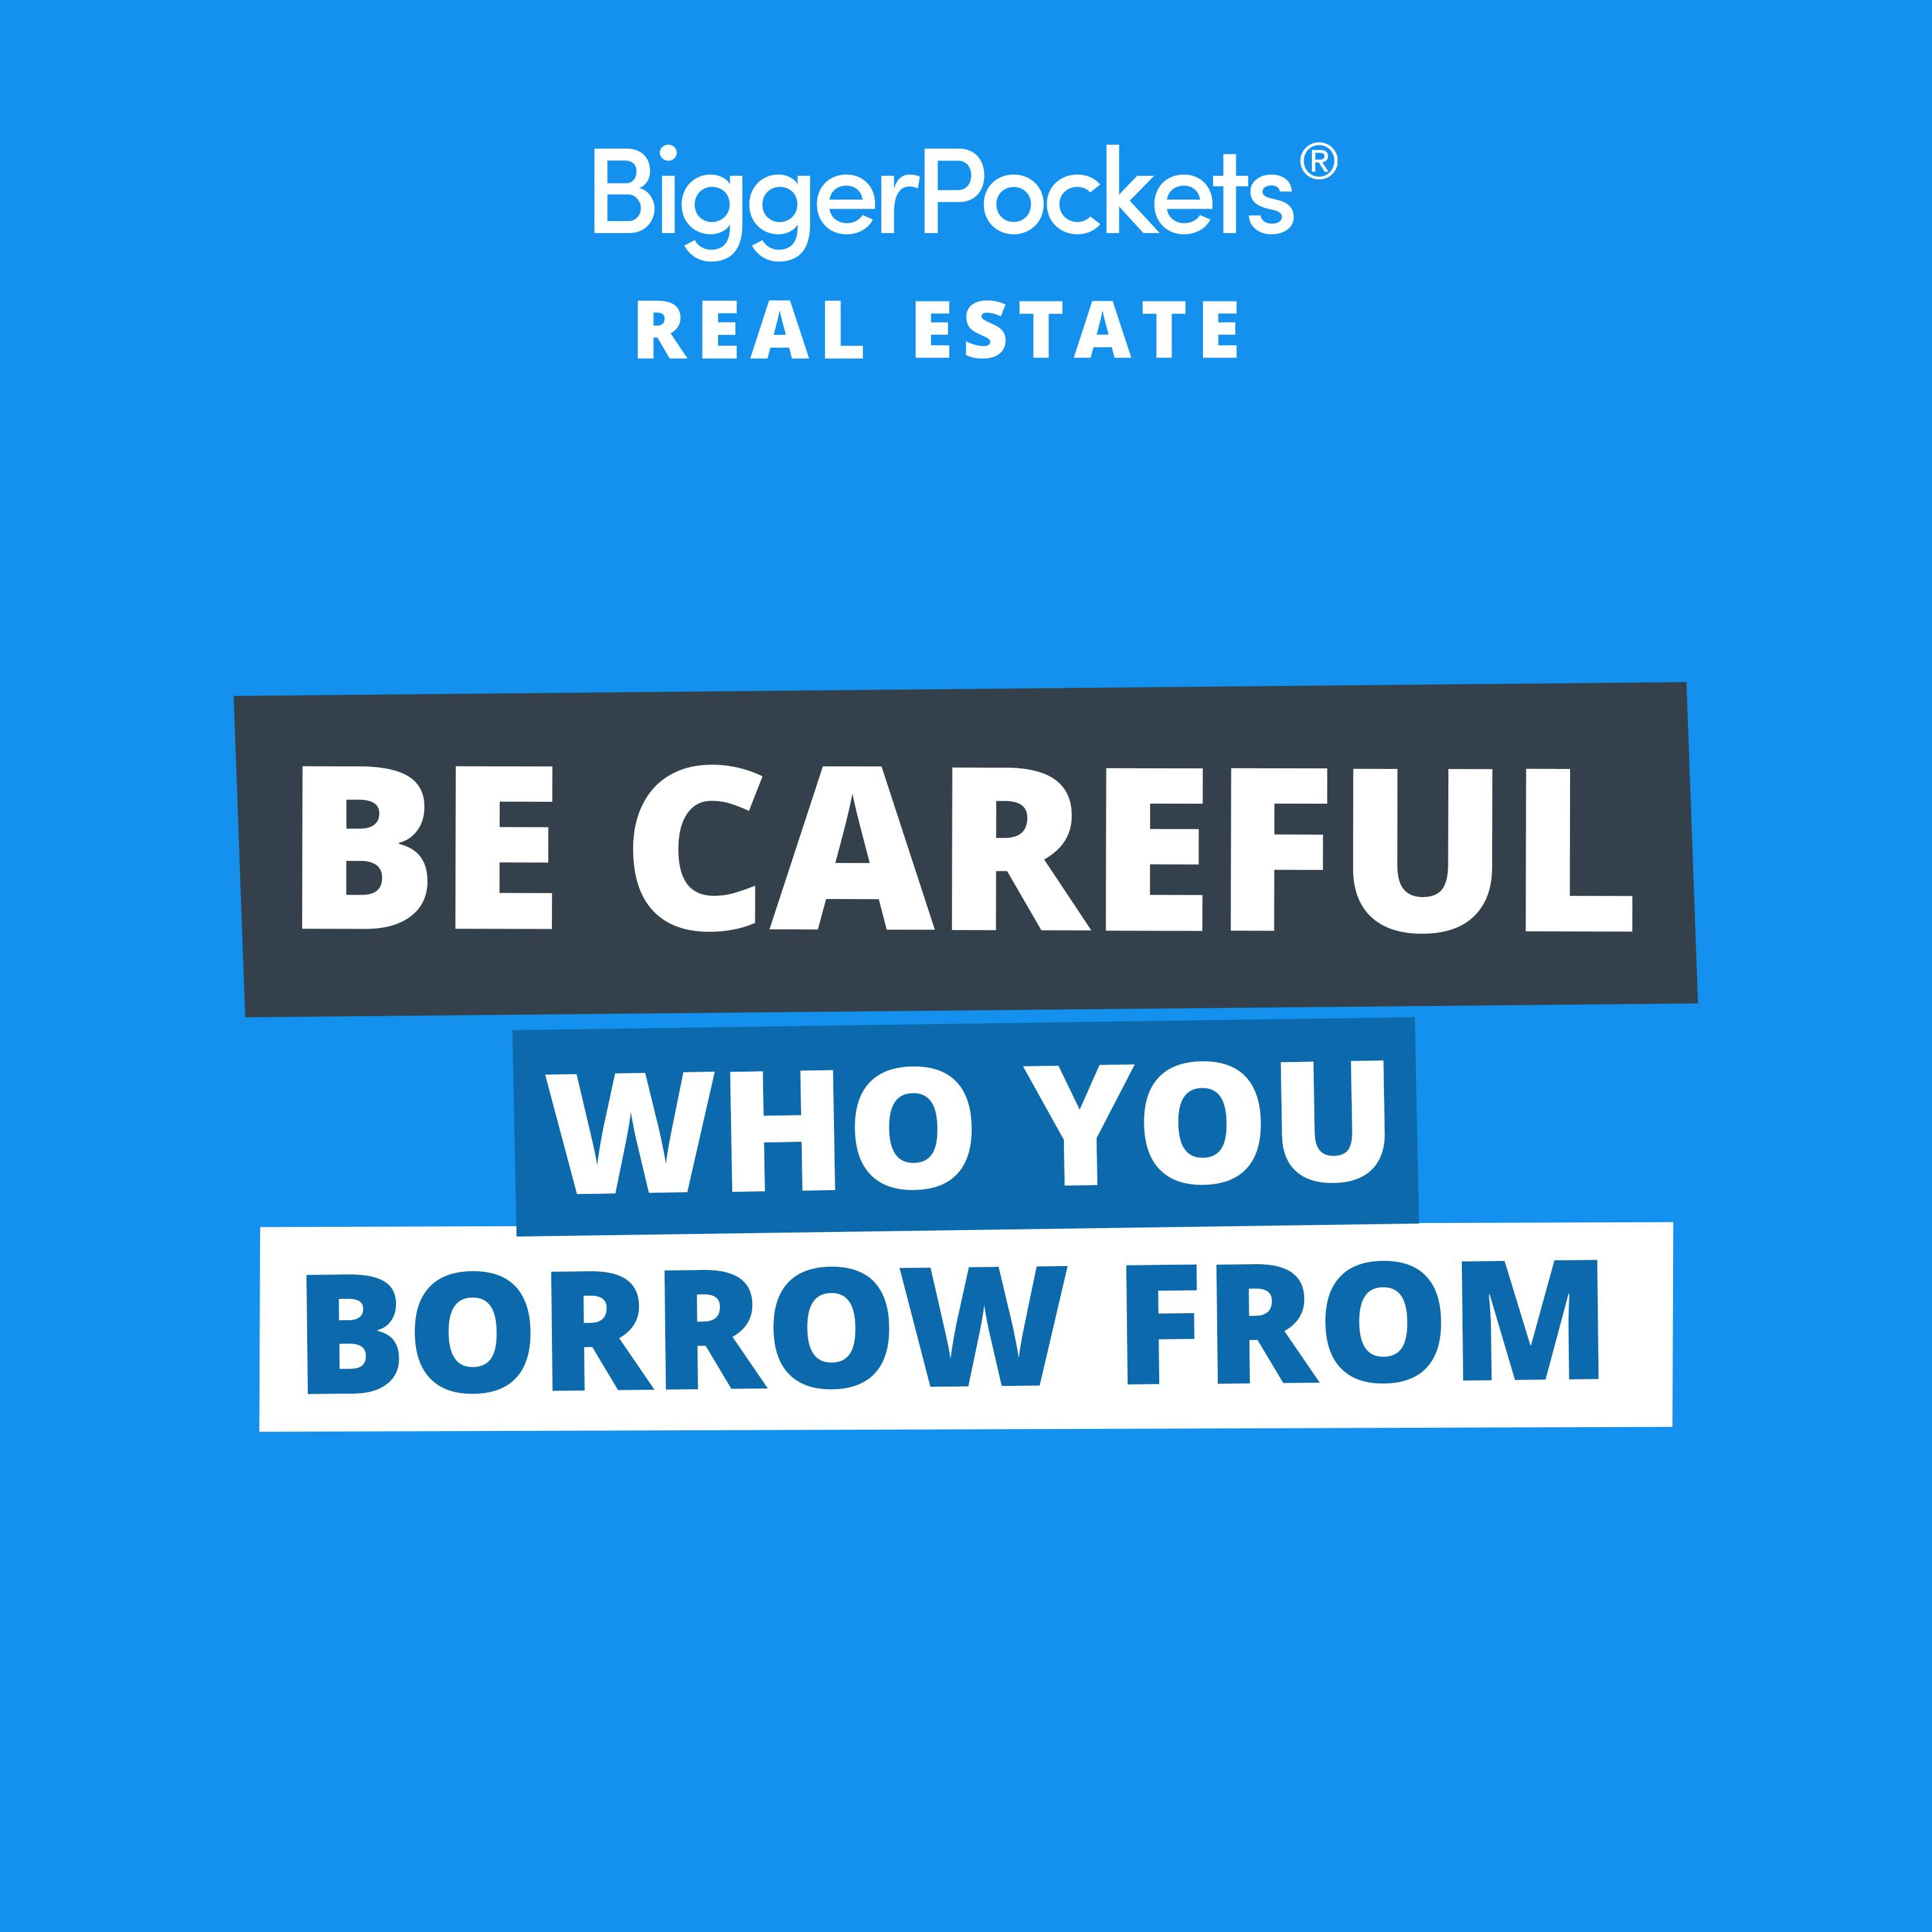 645: Seeing Greene: Will Borrowing Money from Family Ruin Your Real Estate Deal?